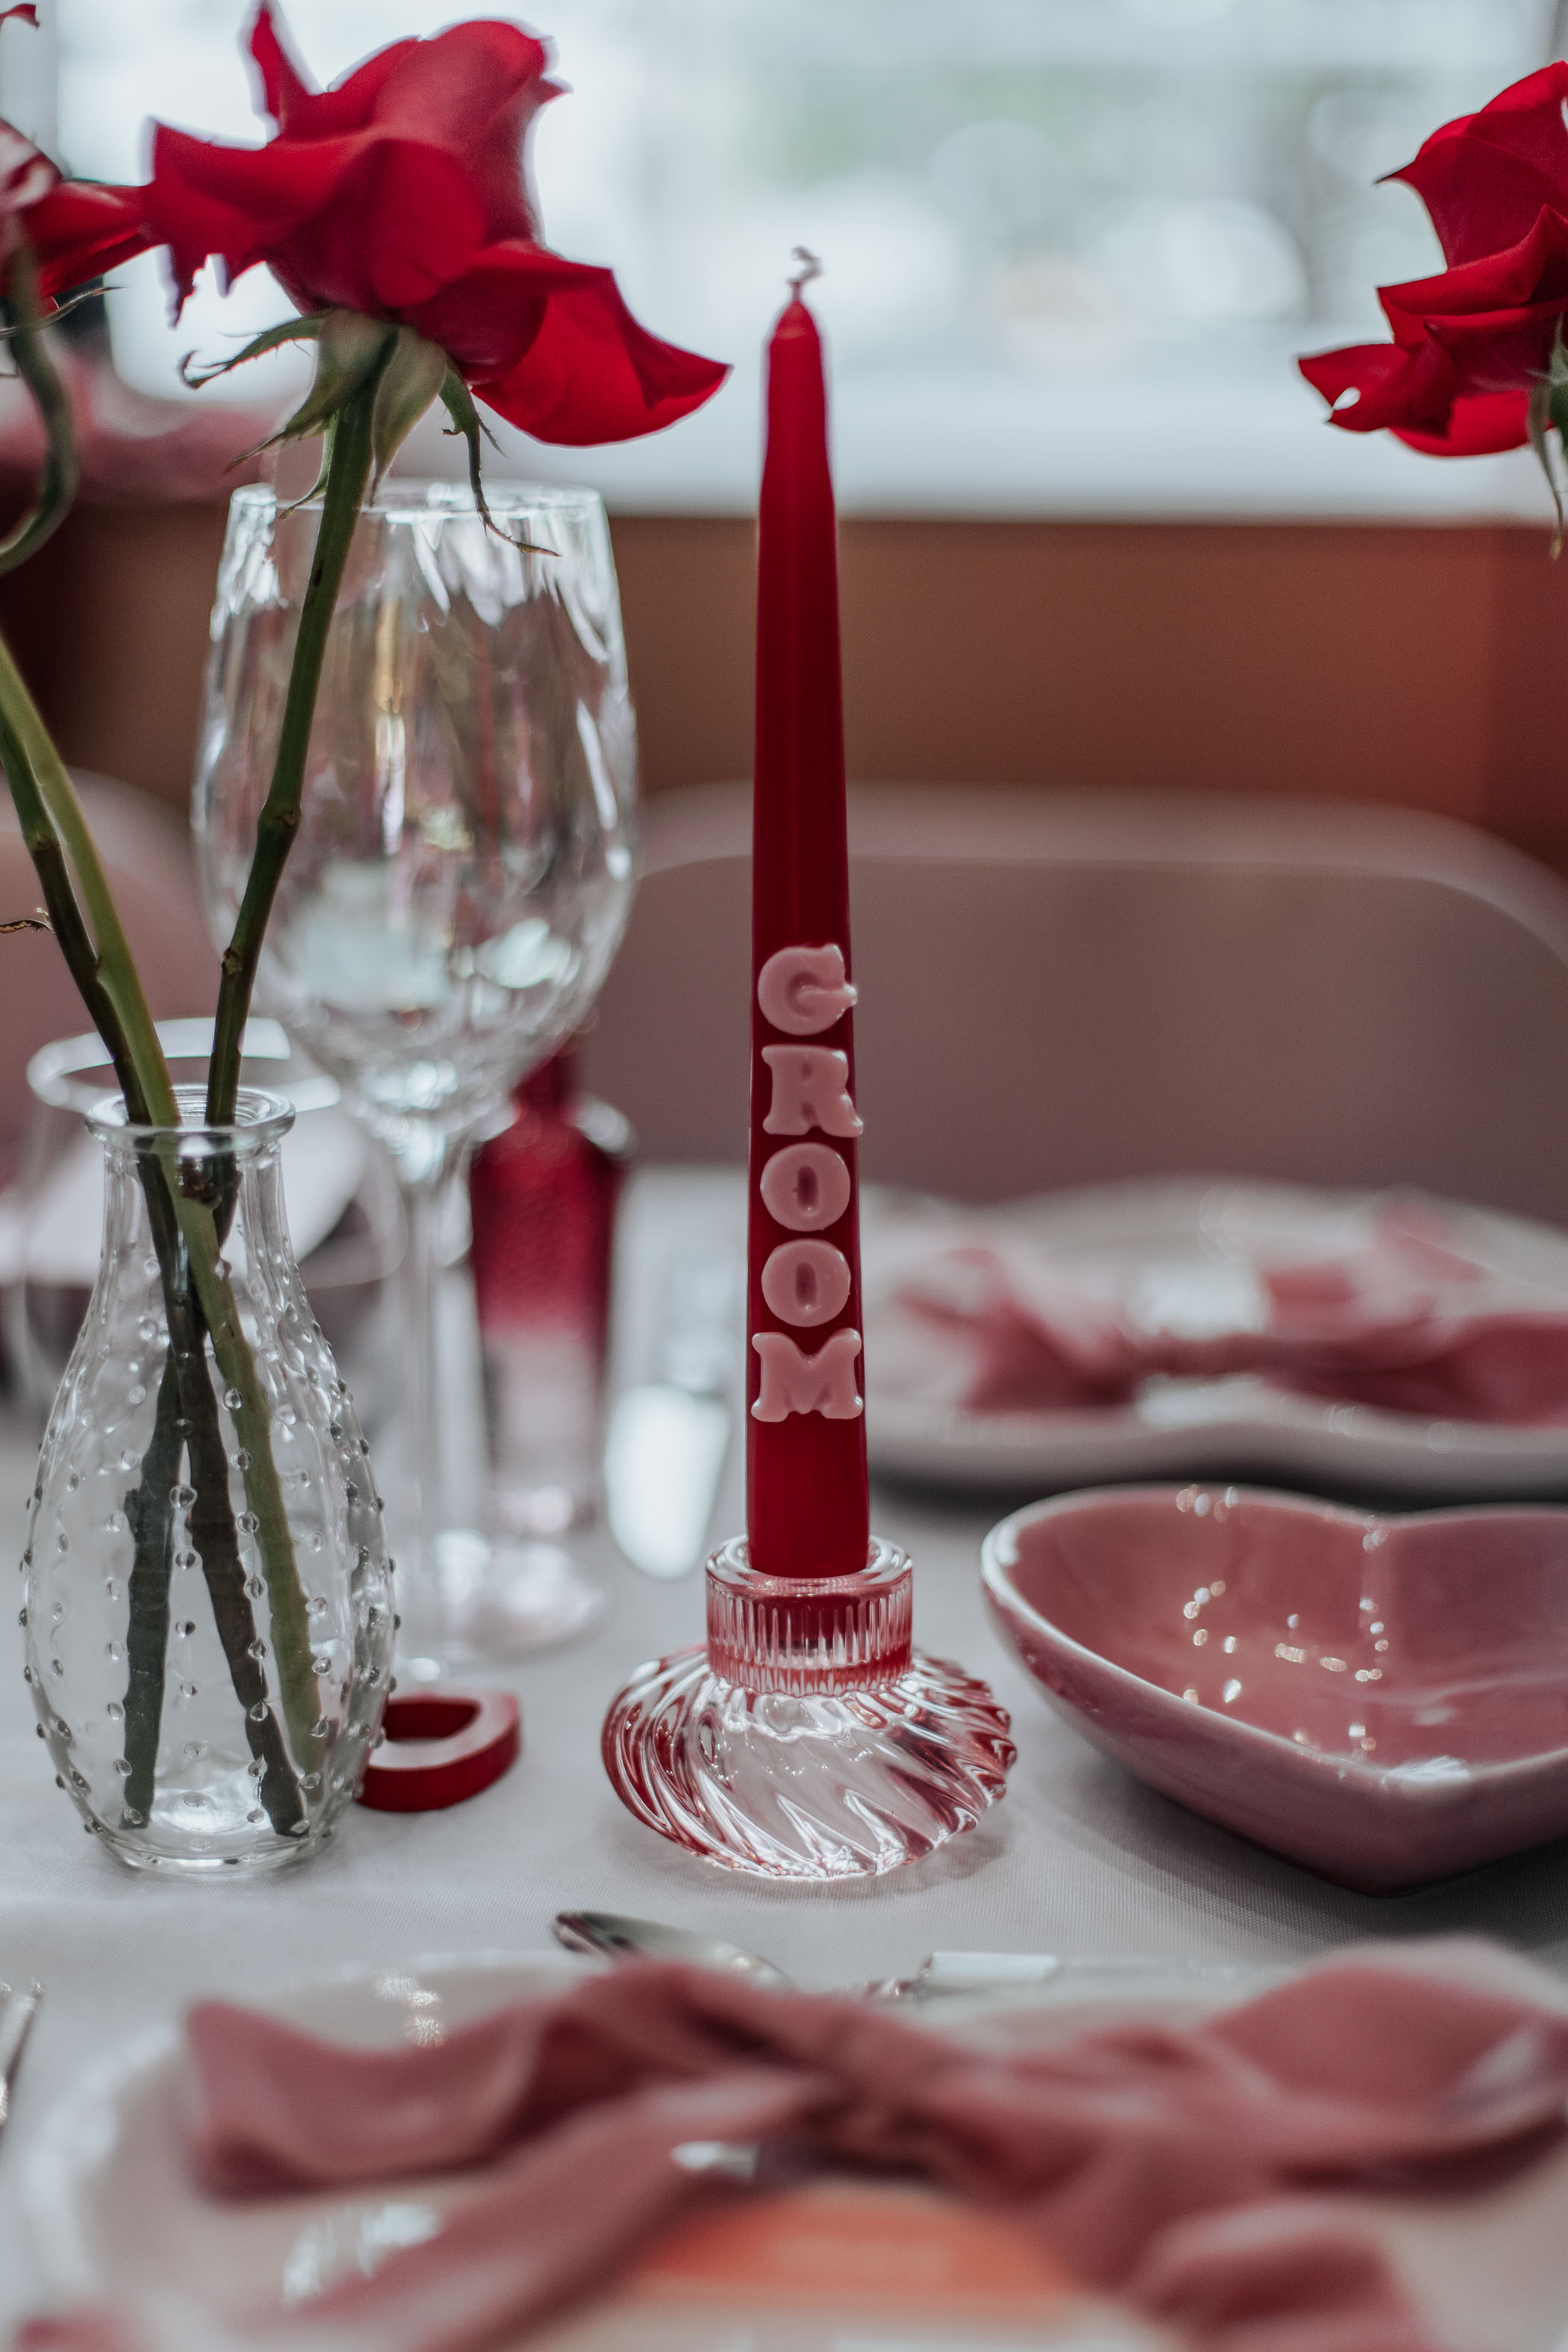 "Groom" red and pink candle